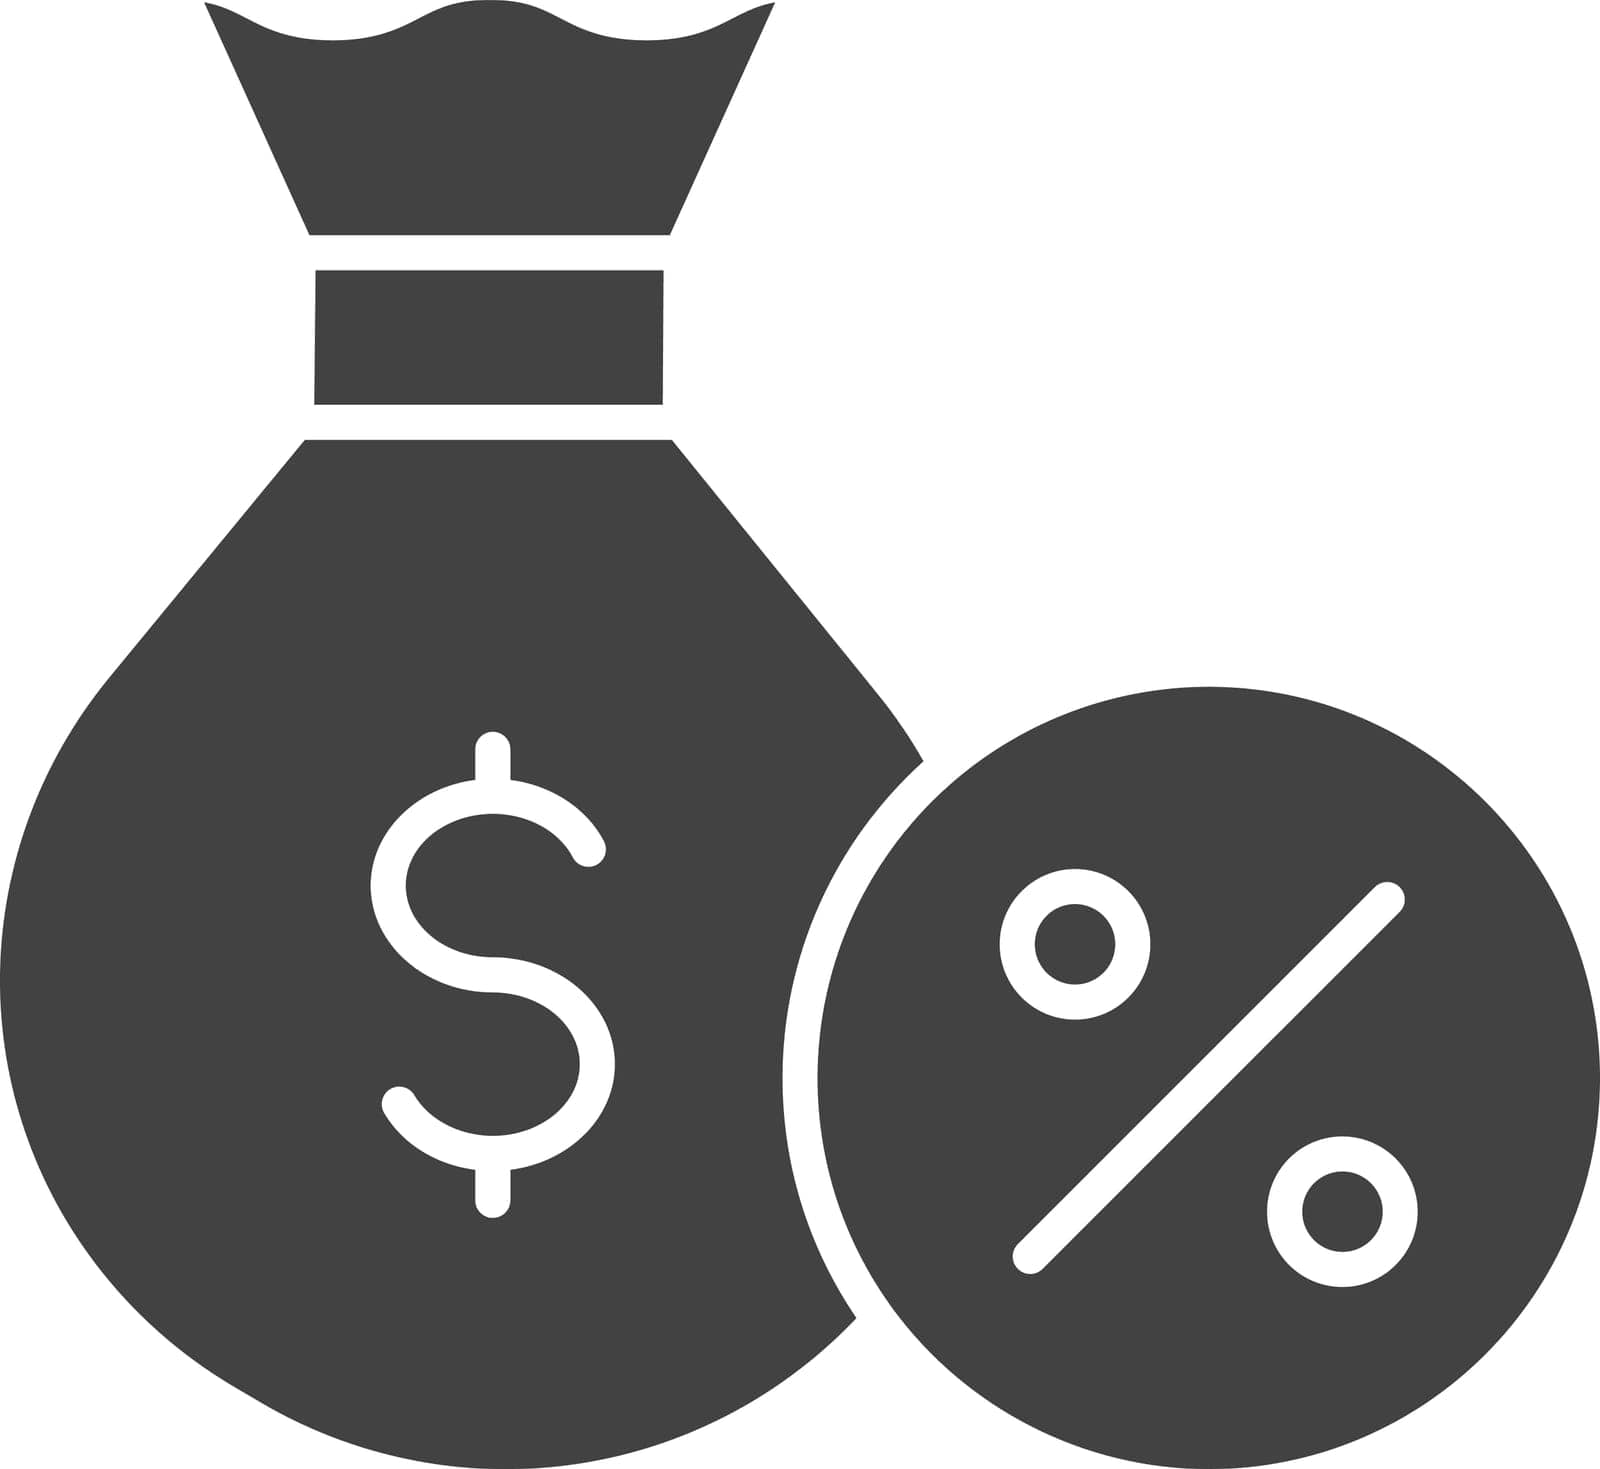 Interest Rate icon vector image. Suitable for mobile application web application and print media.